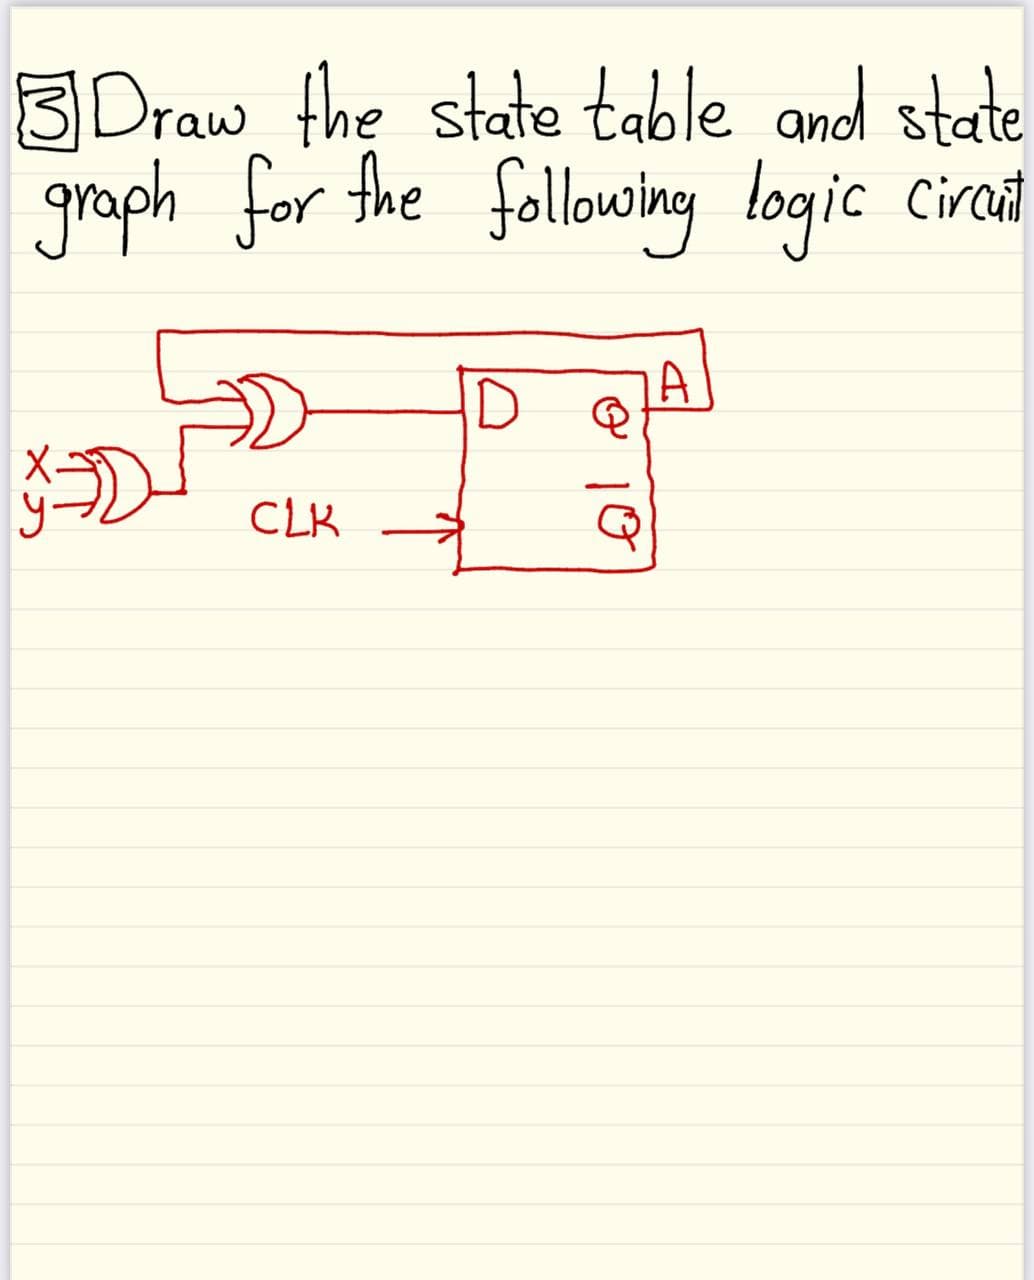 3 Draw the state table and state
graph for the followang logic
Circut
CLK
